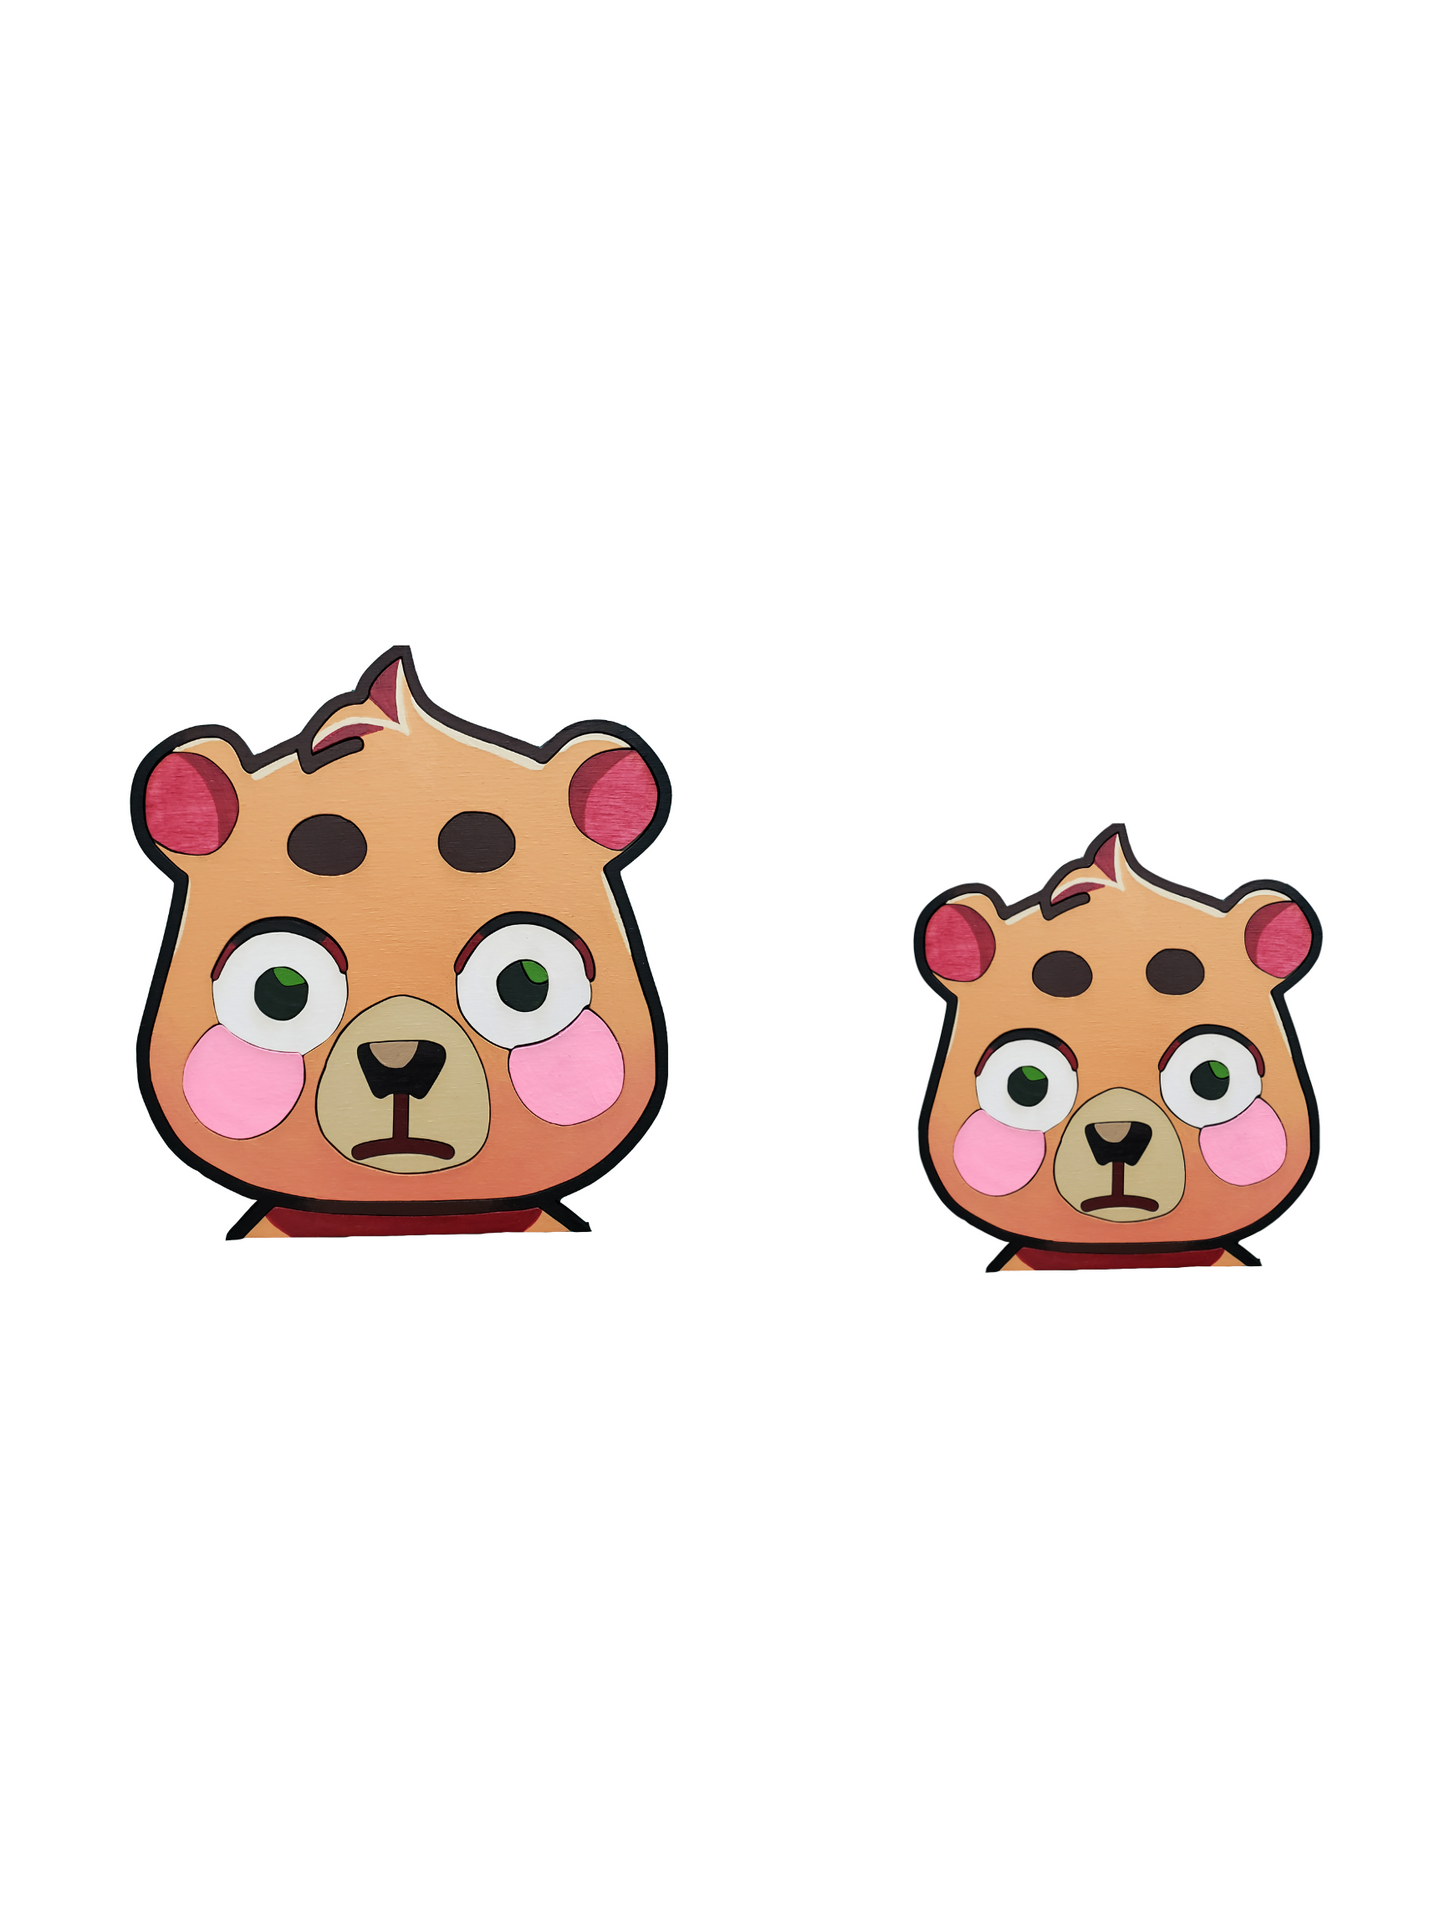 Burr- Replica Emote Wood Art-sleepiFLUSHED **Permanent Collection** (Streamer Purchase)